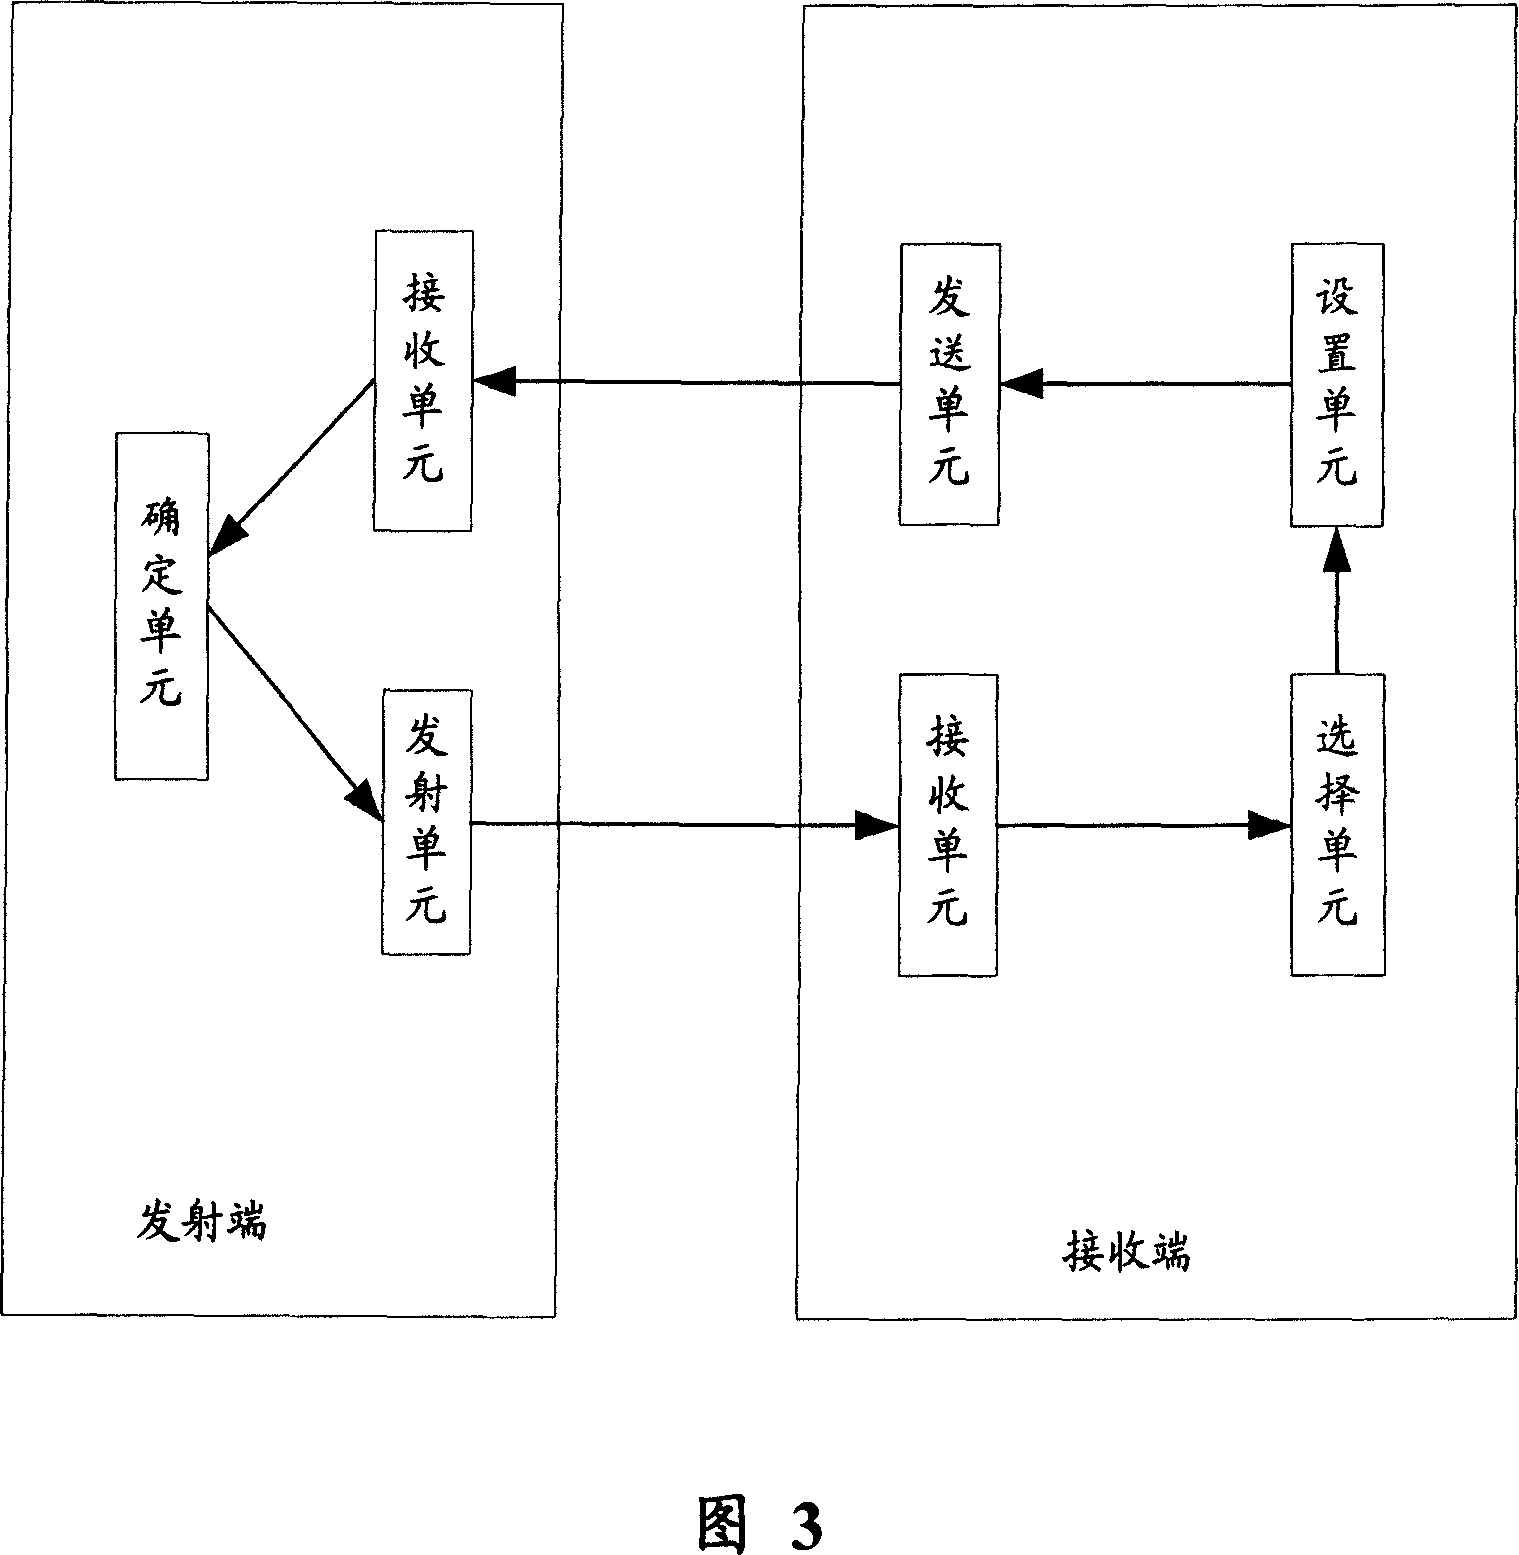 Communication method and system in multi-input multi-output system